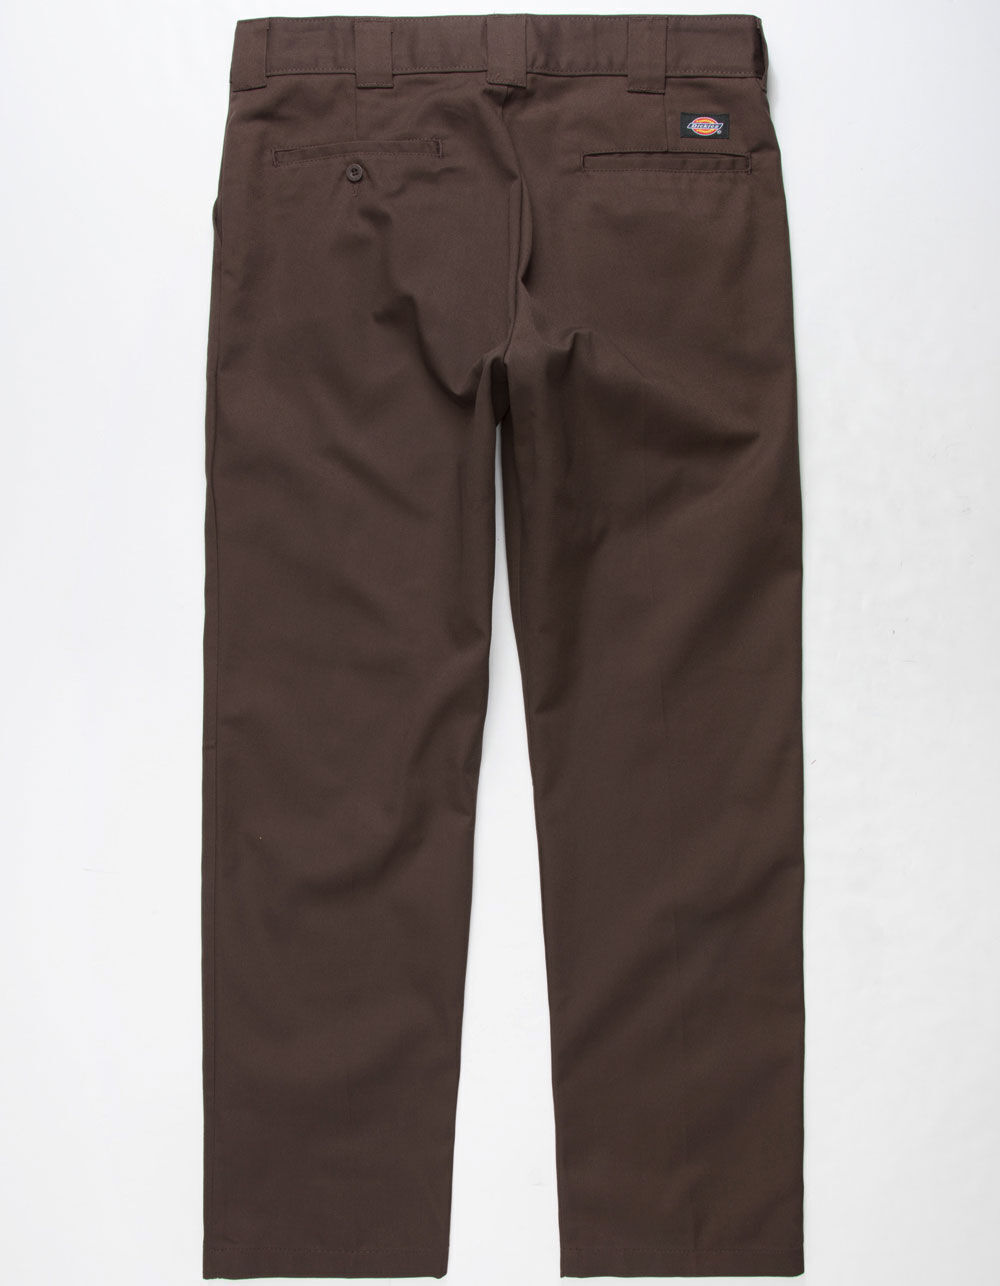 Discover more than 75 light brown dickies pants best - in.eteachers